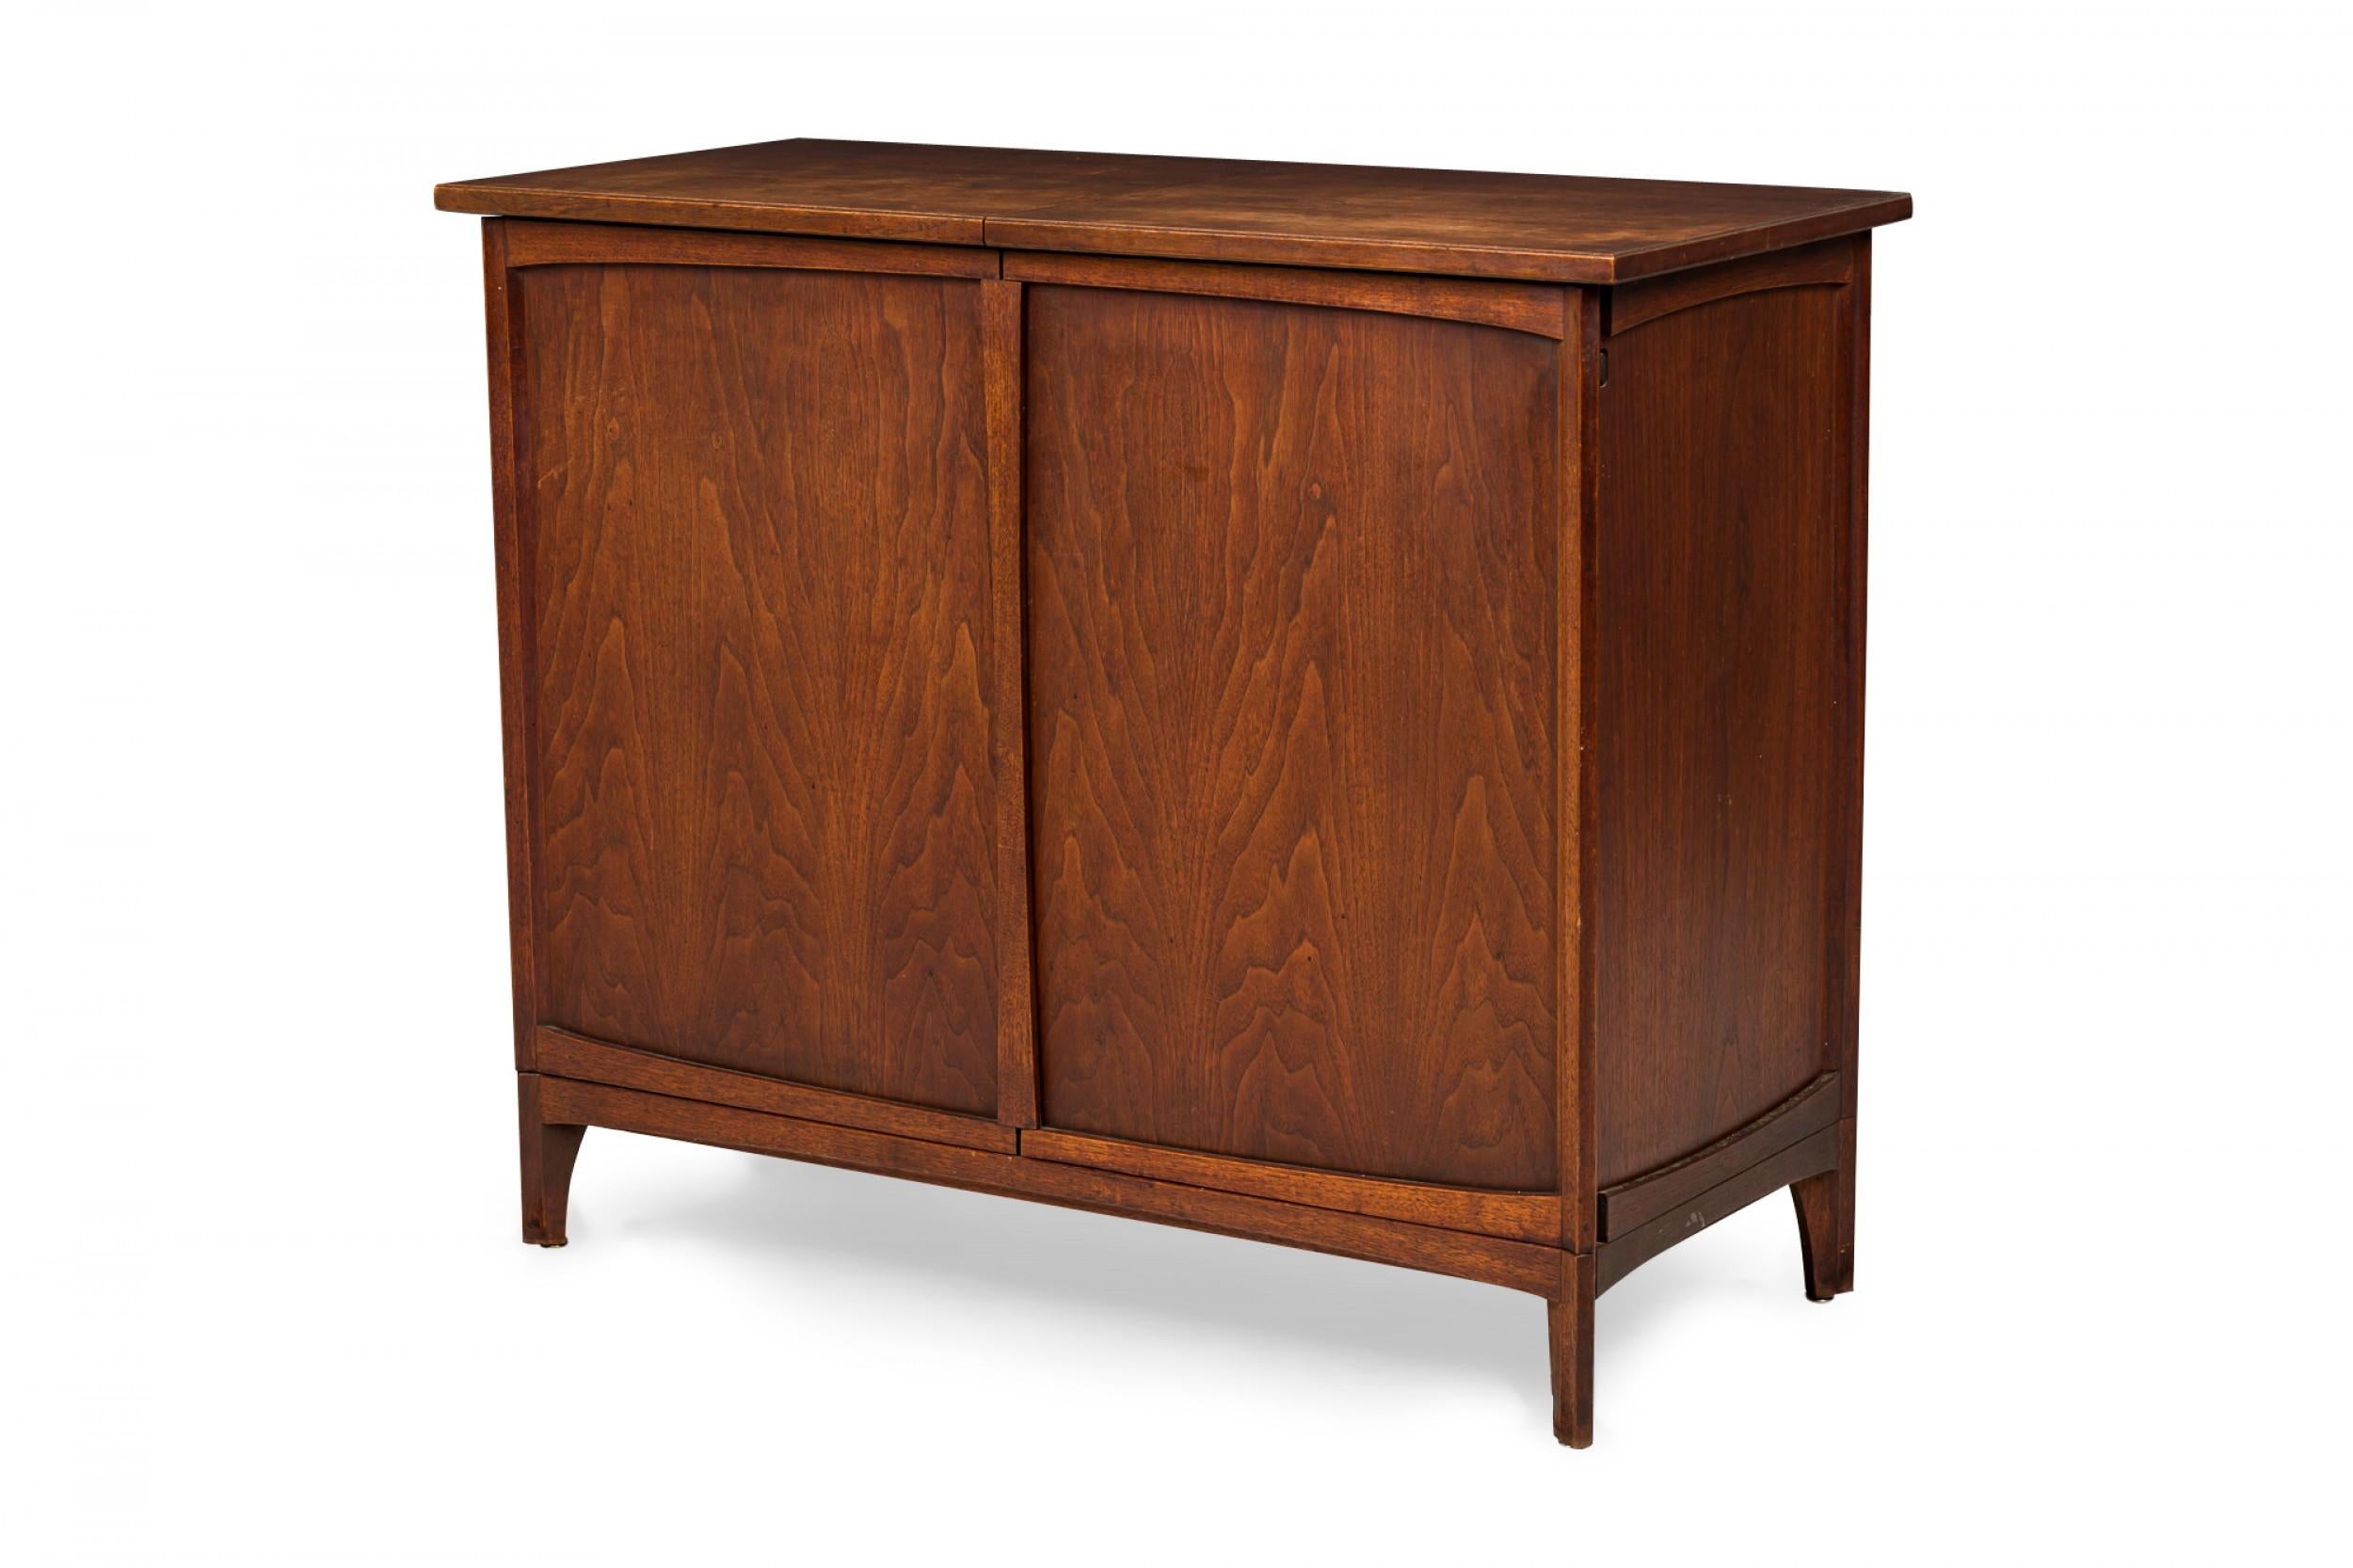 American mid-century walnut dry bar cabinet with a rectangular profile and two doors and a top that all slide outward to reveal an interior compartment with an upper shelf accessible from above, a central drawer, and an open lower cabinet, resting